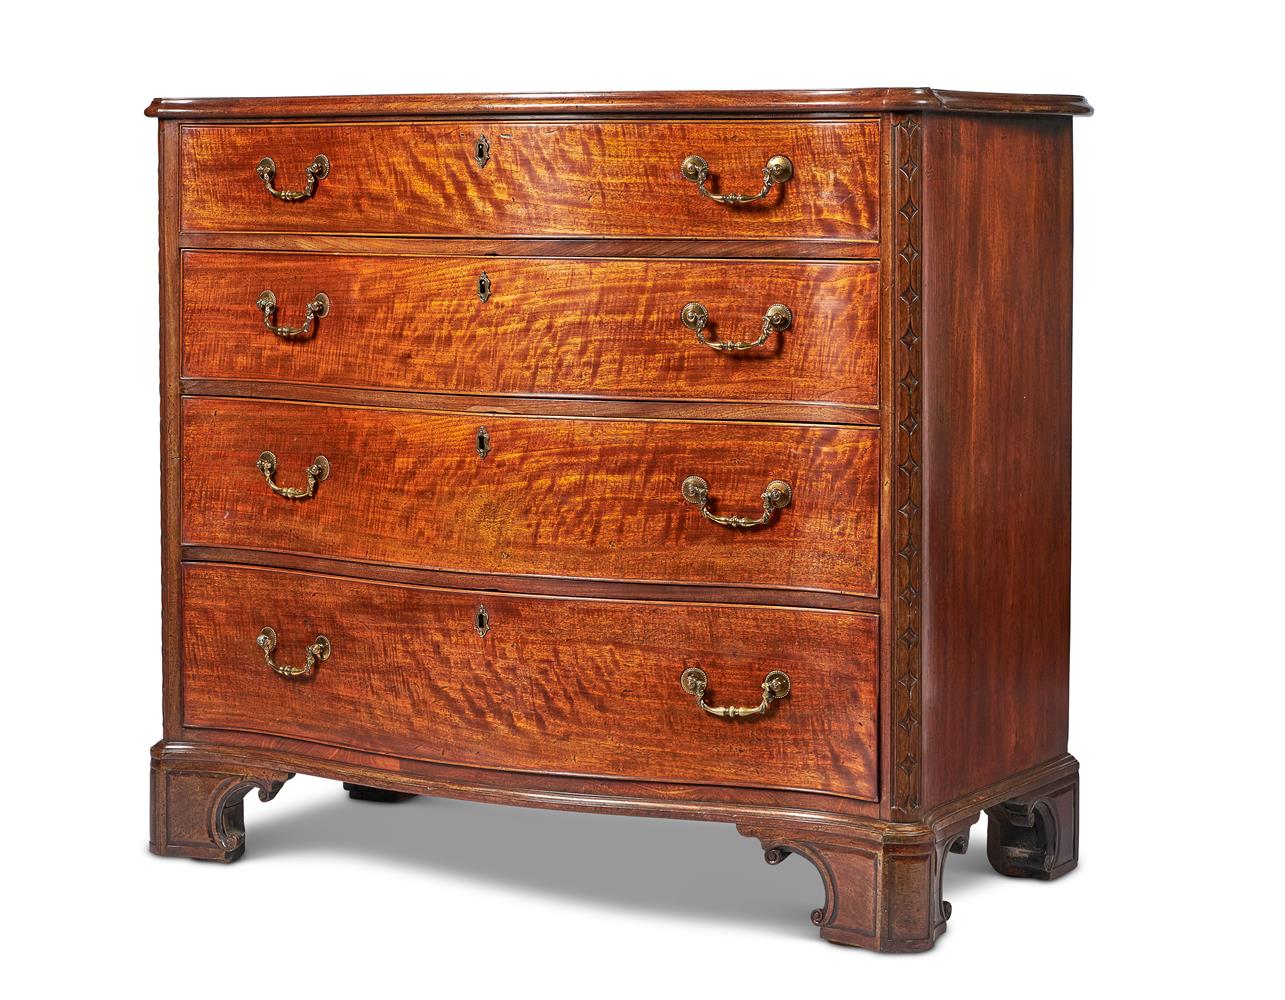 A GEORGE III MAHOGANY SERPENTINE COMMODE, IN THE MANNER OF THOMAS CHIPPENDALE, CIRCA 1765 - Image 4 of 11